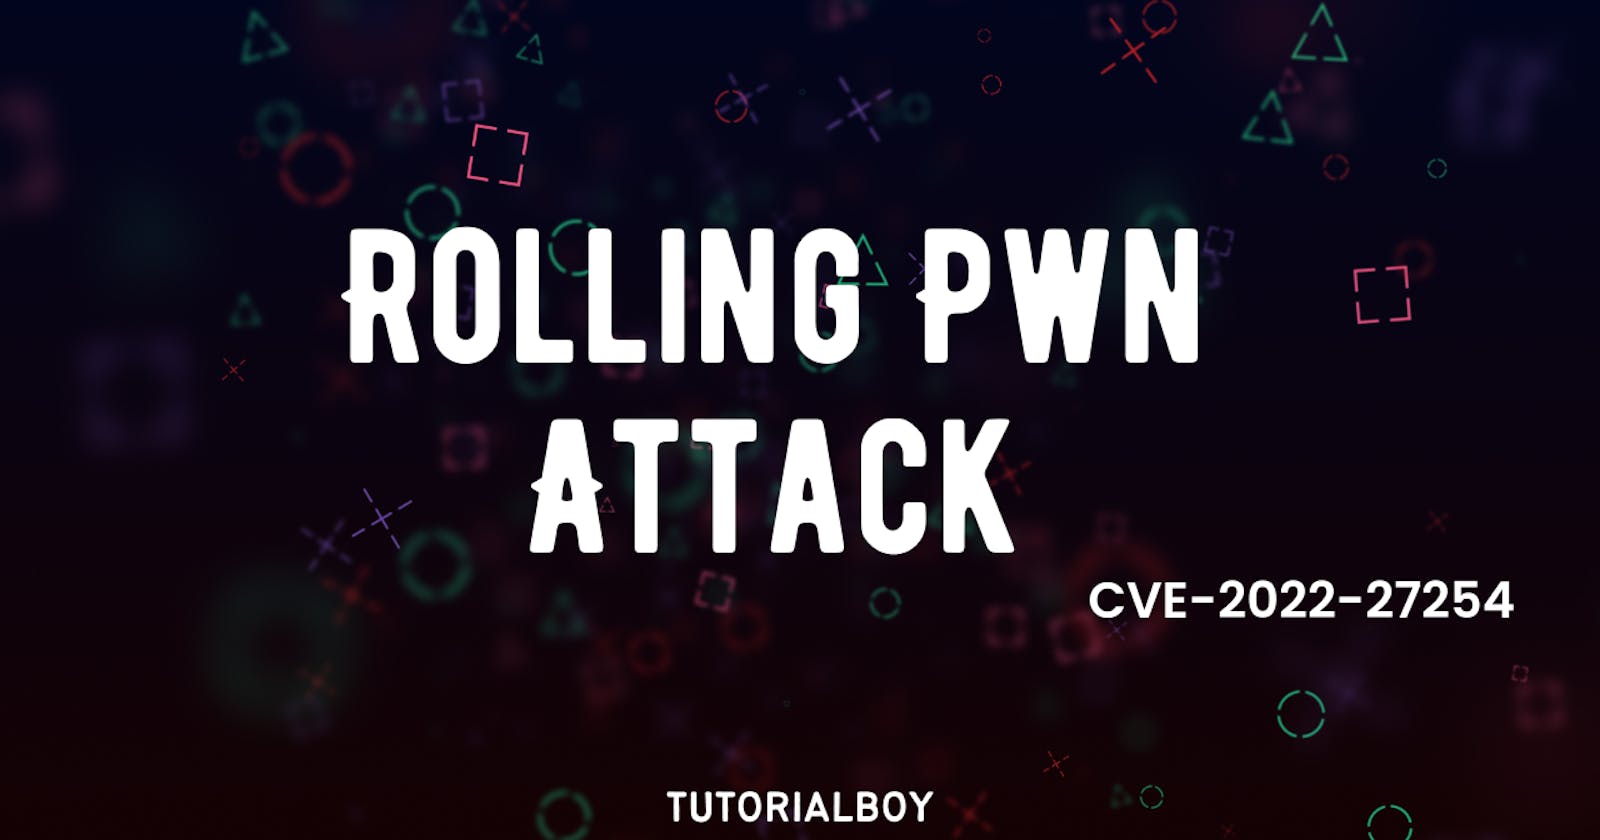 A Rolling-PWN Attack Vulnerability Leads to Unlock or Start Vehicles Remotely - CVE-2022-27254